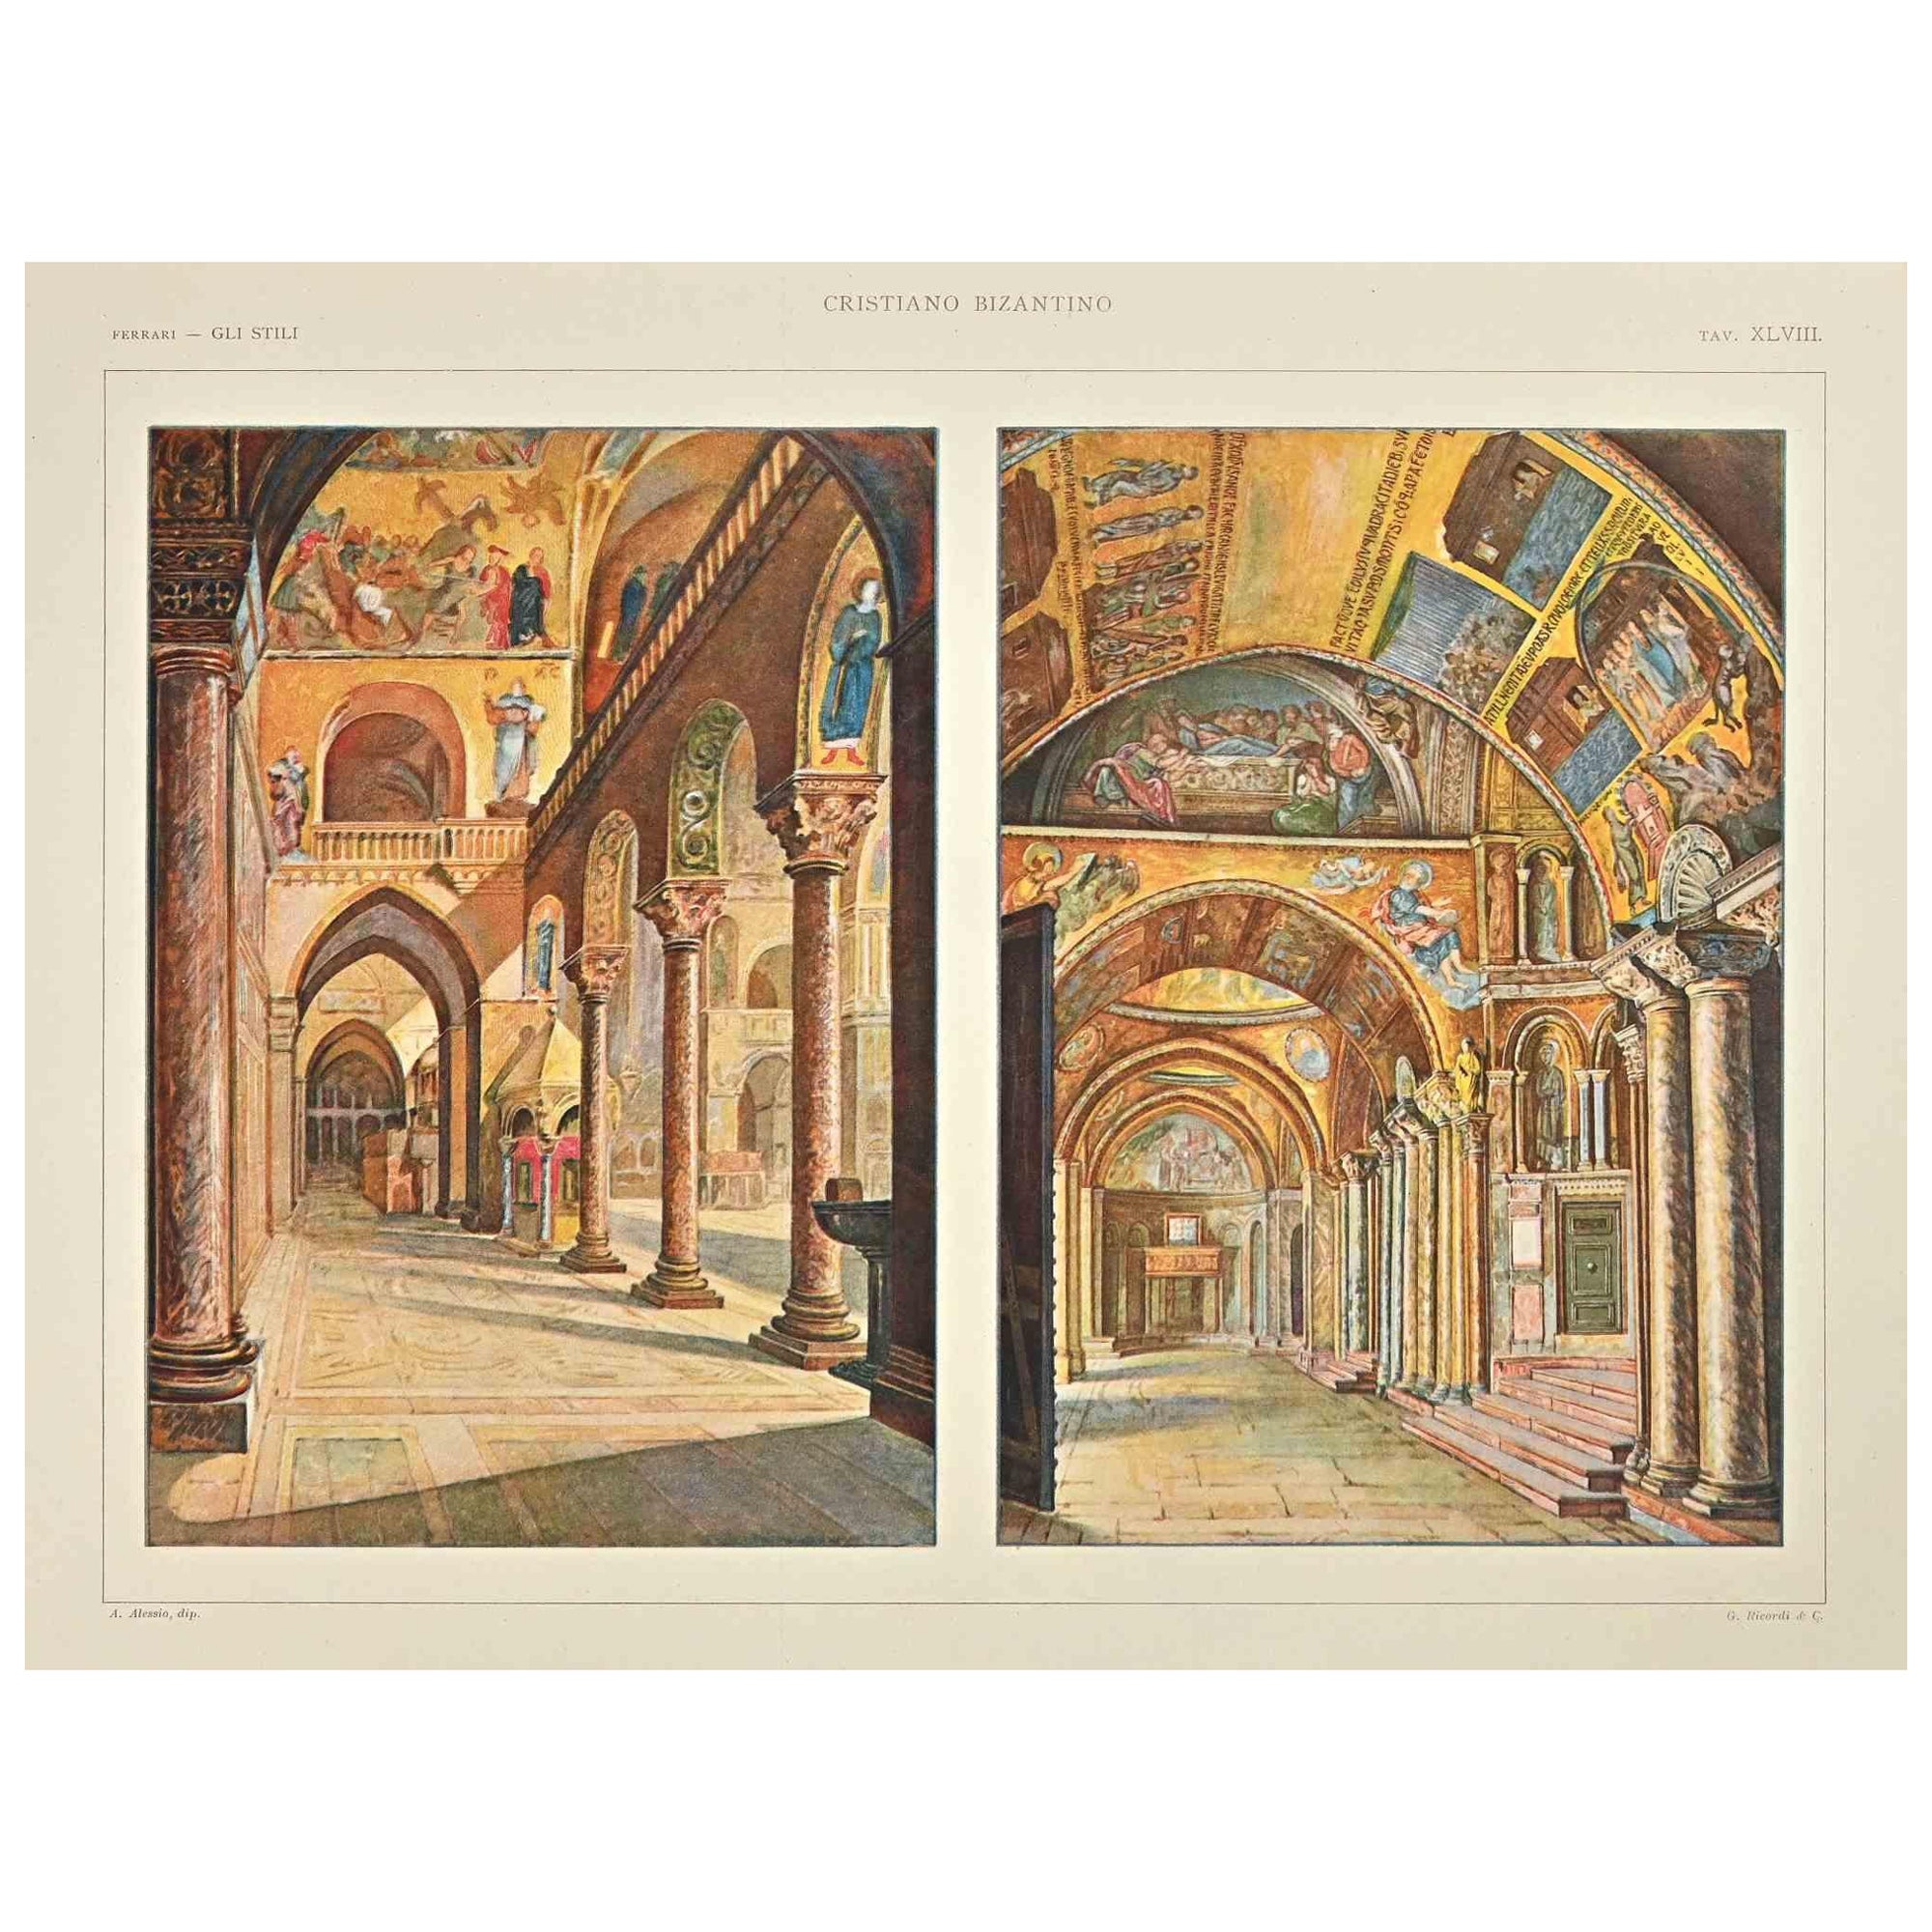 Christian Byzantine Decorative Style is a print on ivory-colored paper realized by Andrea Alessio in the early 20th Century.

Signed on the plate on the lower.

Vintage Chromolithograph.

Very good conditions.

The artwork represents Decorative